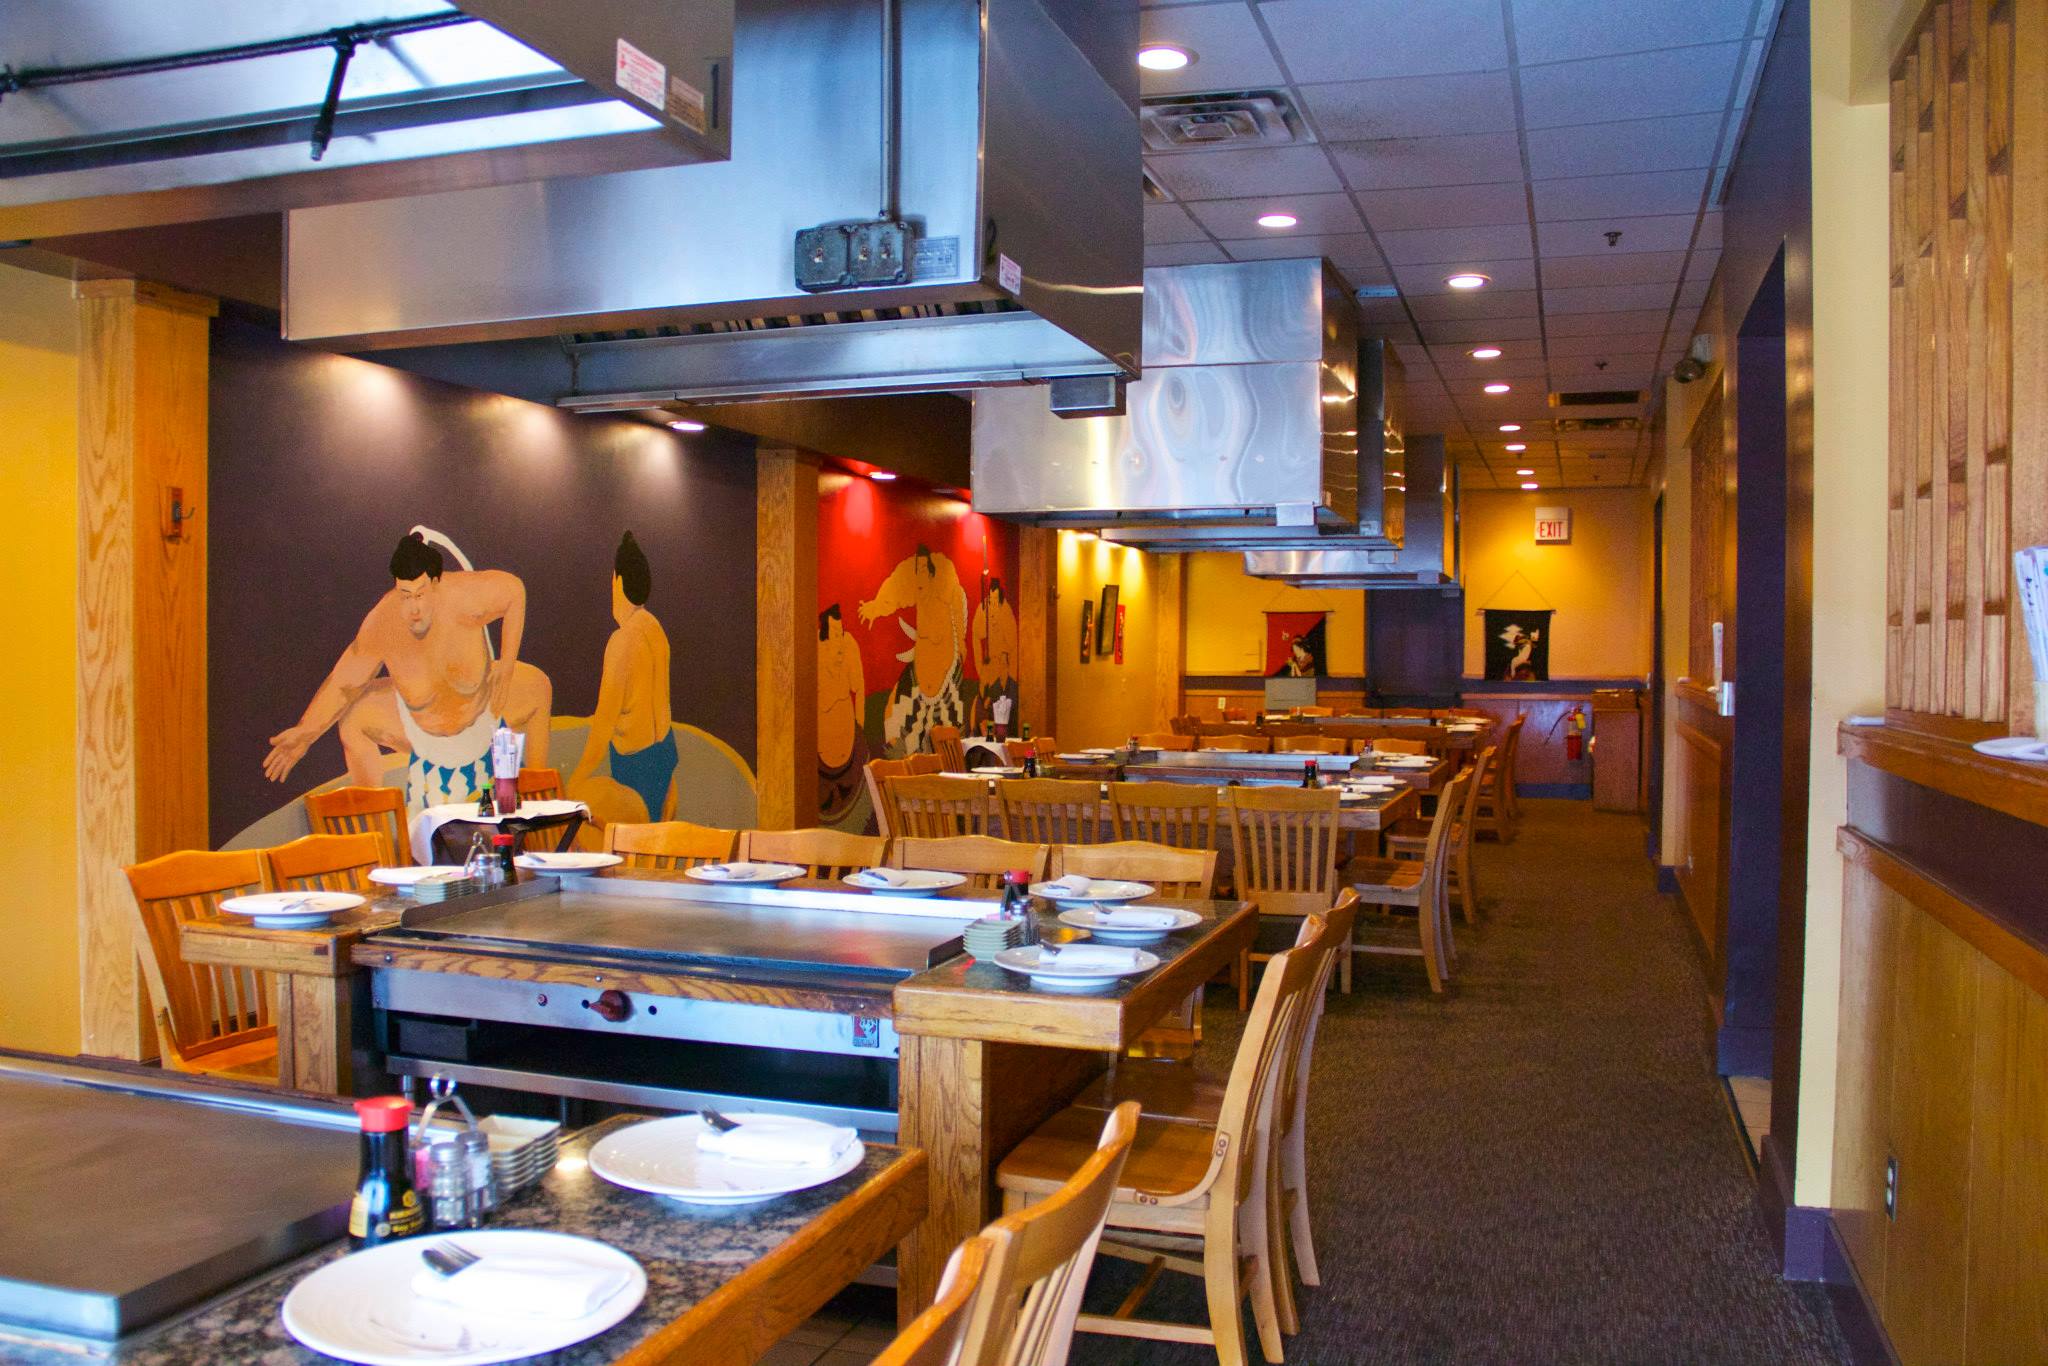 *Facebook Friday Freebie!  Enter to Win a $50 Gift Certificate to Asahi Japanese Steakhouse!